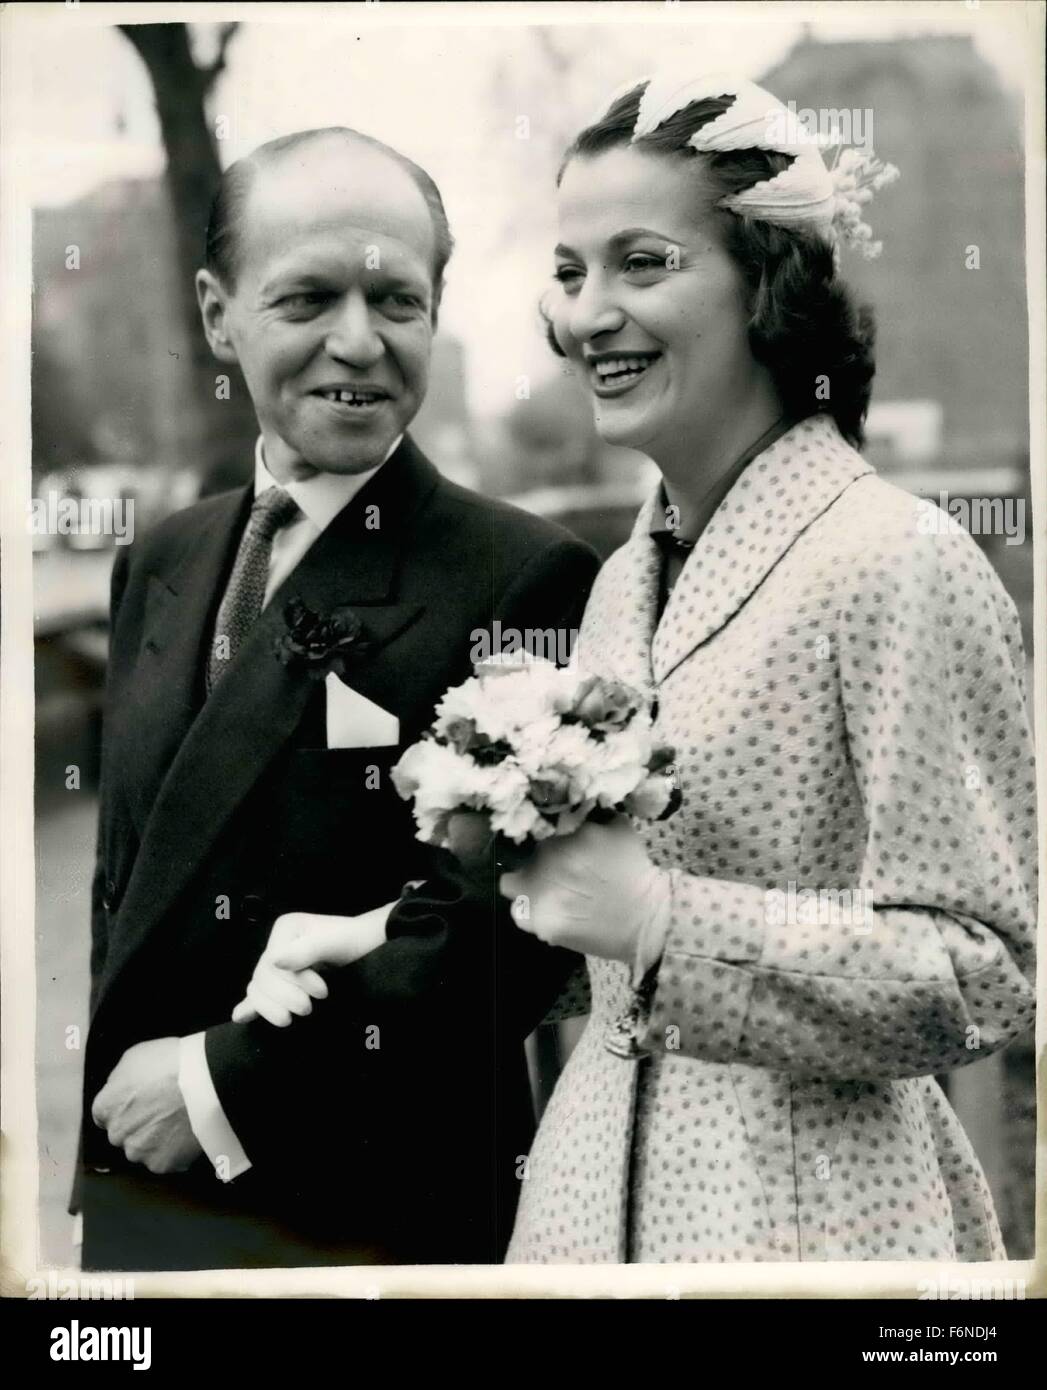 1954 - Great-great grandson of famous poet weds for third time. Ex-husband of Eva Bartok The marriage took place this morning at Chelsea Register Office of 43 year old William Wordsworth, great-great grandson of the poet, and 27 year old Gina Rothschild ex-actress daughter of a Kensington Doctor. The decree dissolving the marriage of the groom to actress Eva Bartok was made absolute recently. This is his third marriage. Keystone Photo Shows: The bride and bridegroom after the wedding this morning. © Keystone Pictures USA/ZUMAPRESS.com/Alamy Live News Stock Photo